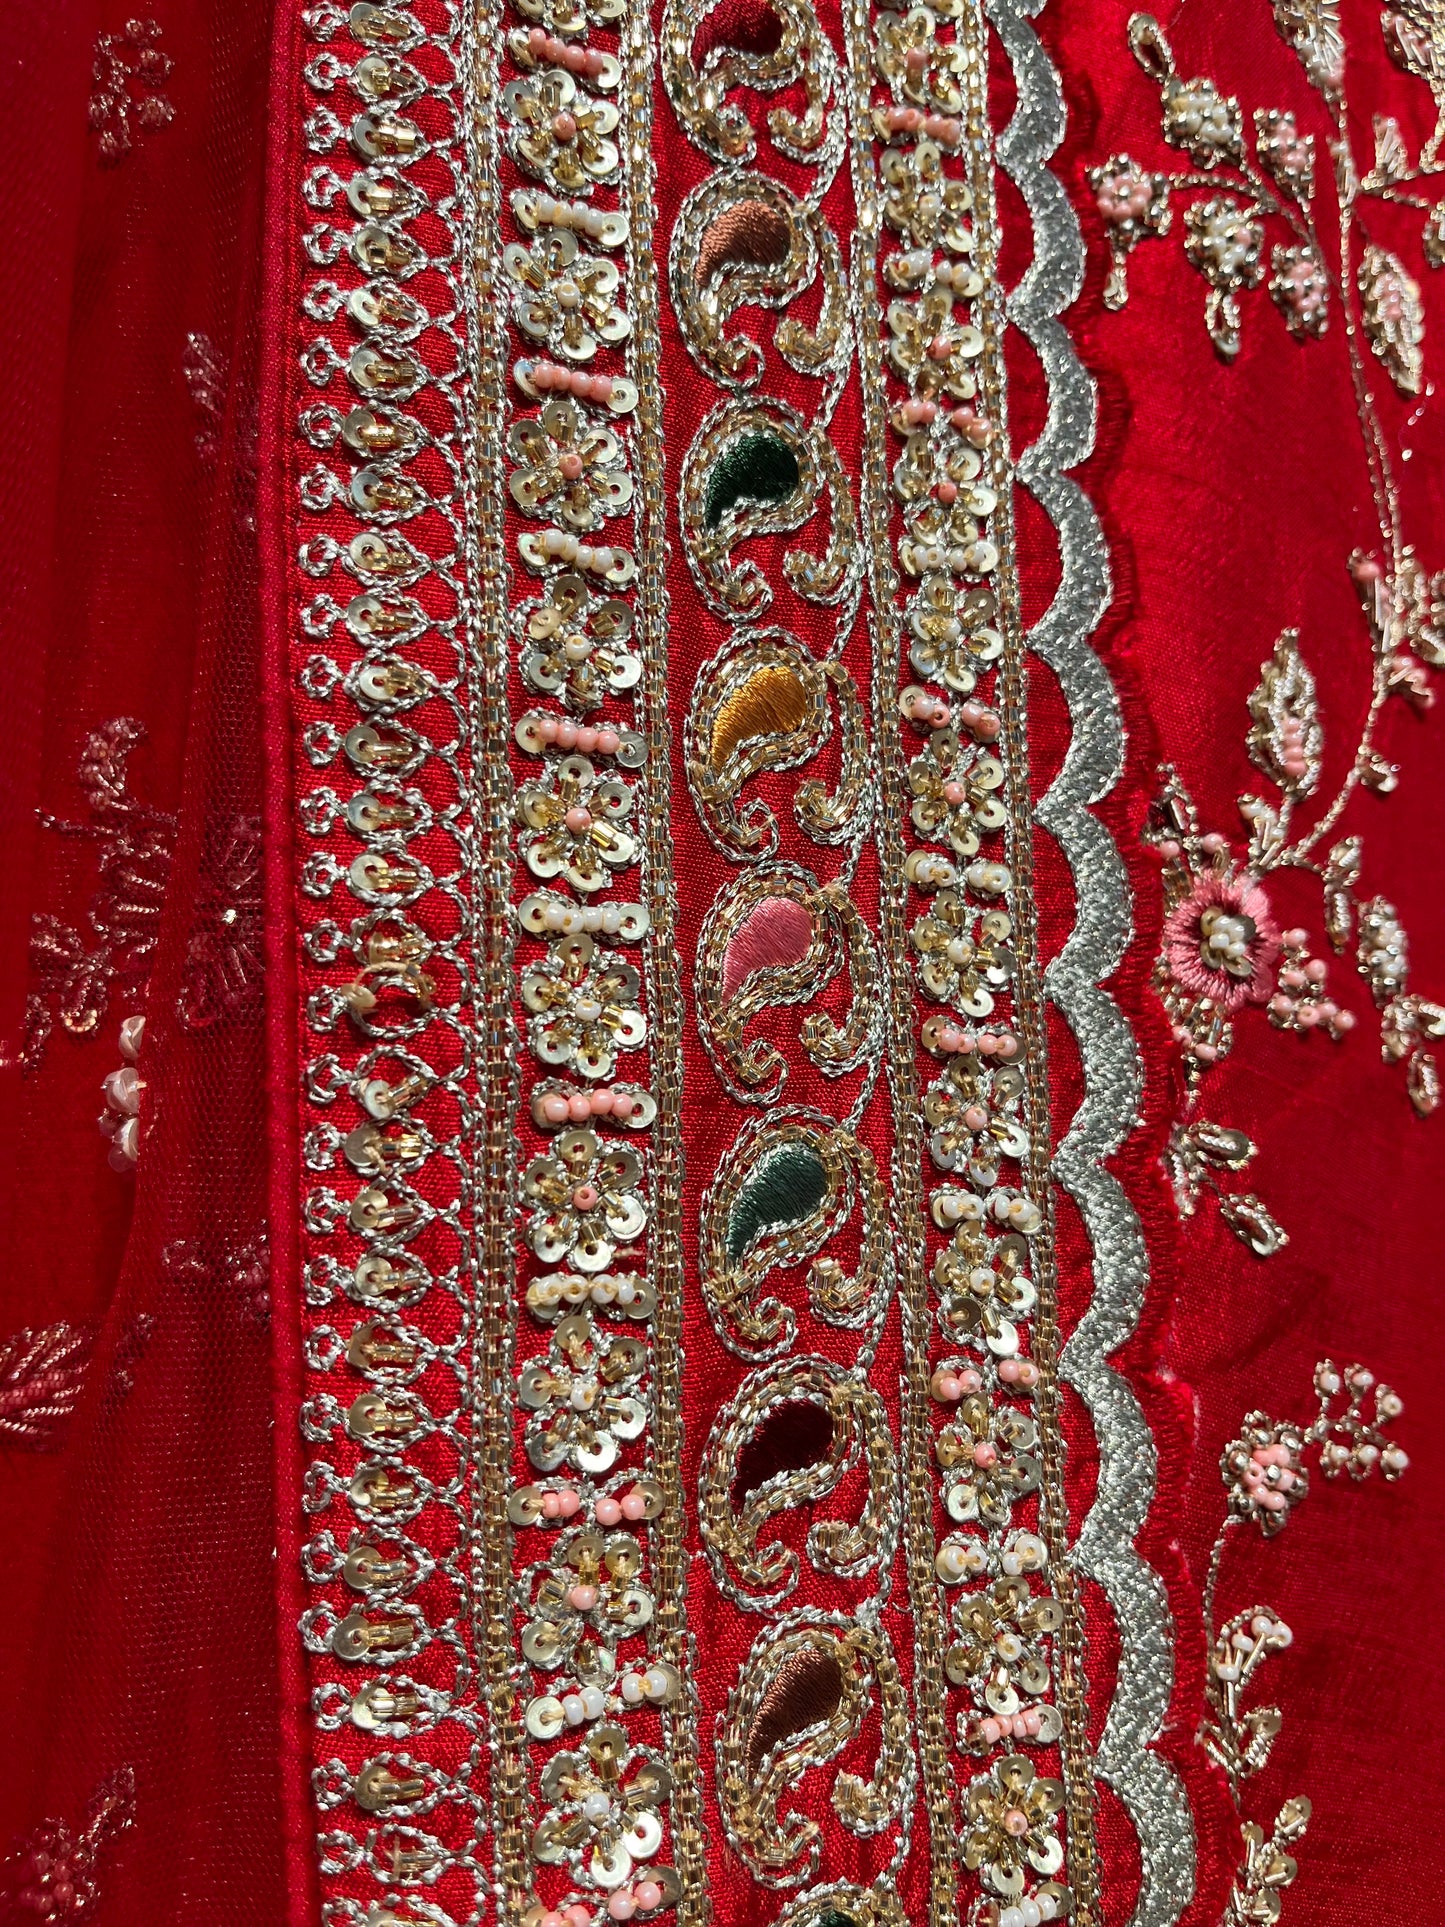 RED COLOUR PURE SILK HAND EMBROIDERED BRIDAL LEHENGA WITH NET DUPATTA EMBELLISHED WITH ZARDOZI, CUTDANA & SEQUINS WORK